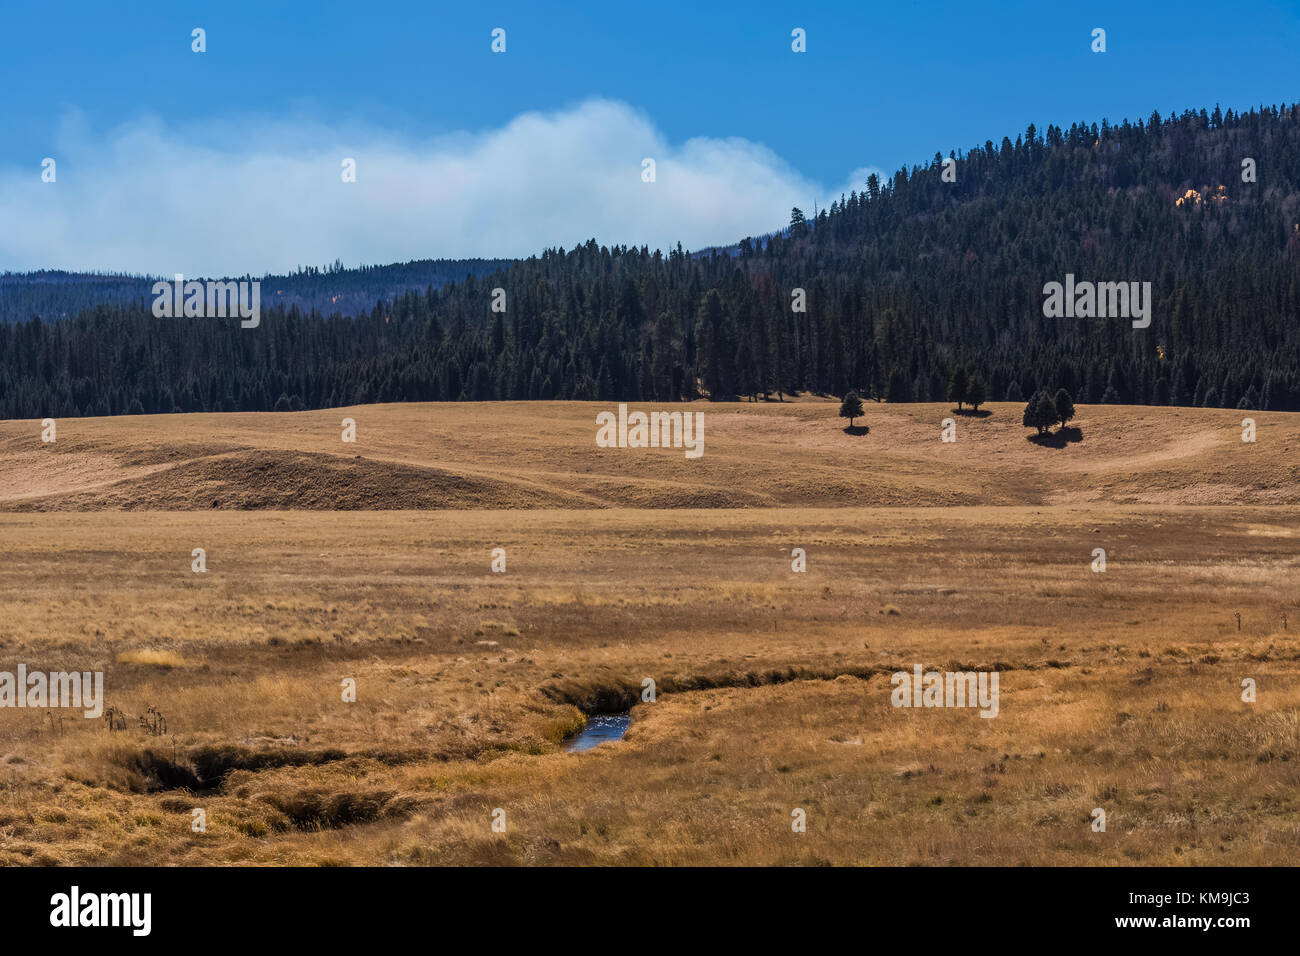 Vast grasslands in Valles Caldera National Preserve, a preserve run by the National Park Service, with smoke rising from a prescribed burn in the dist Stock Photo